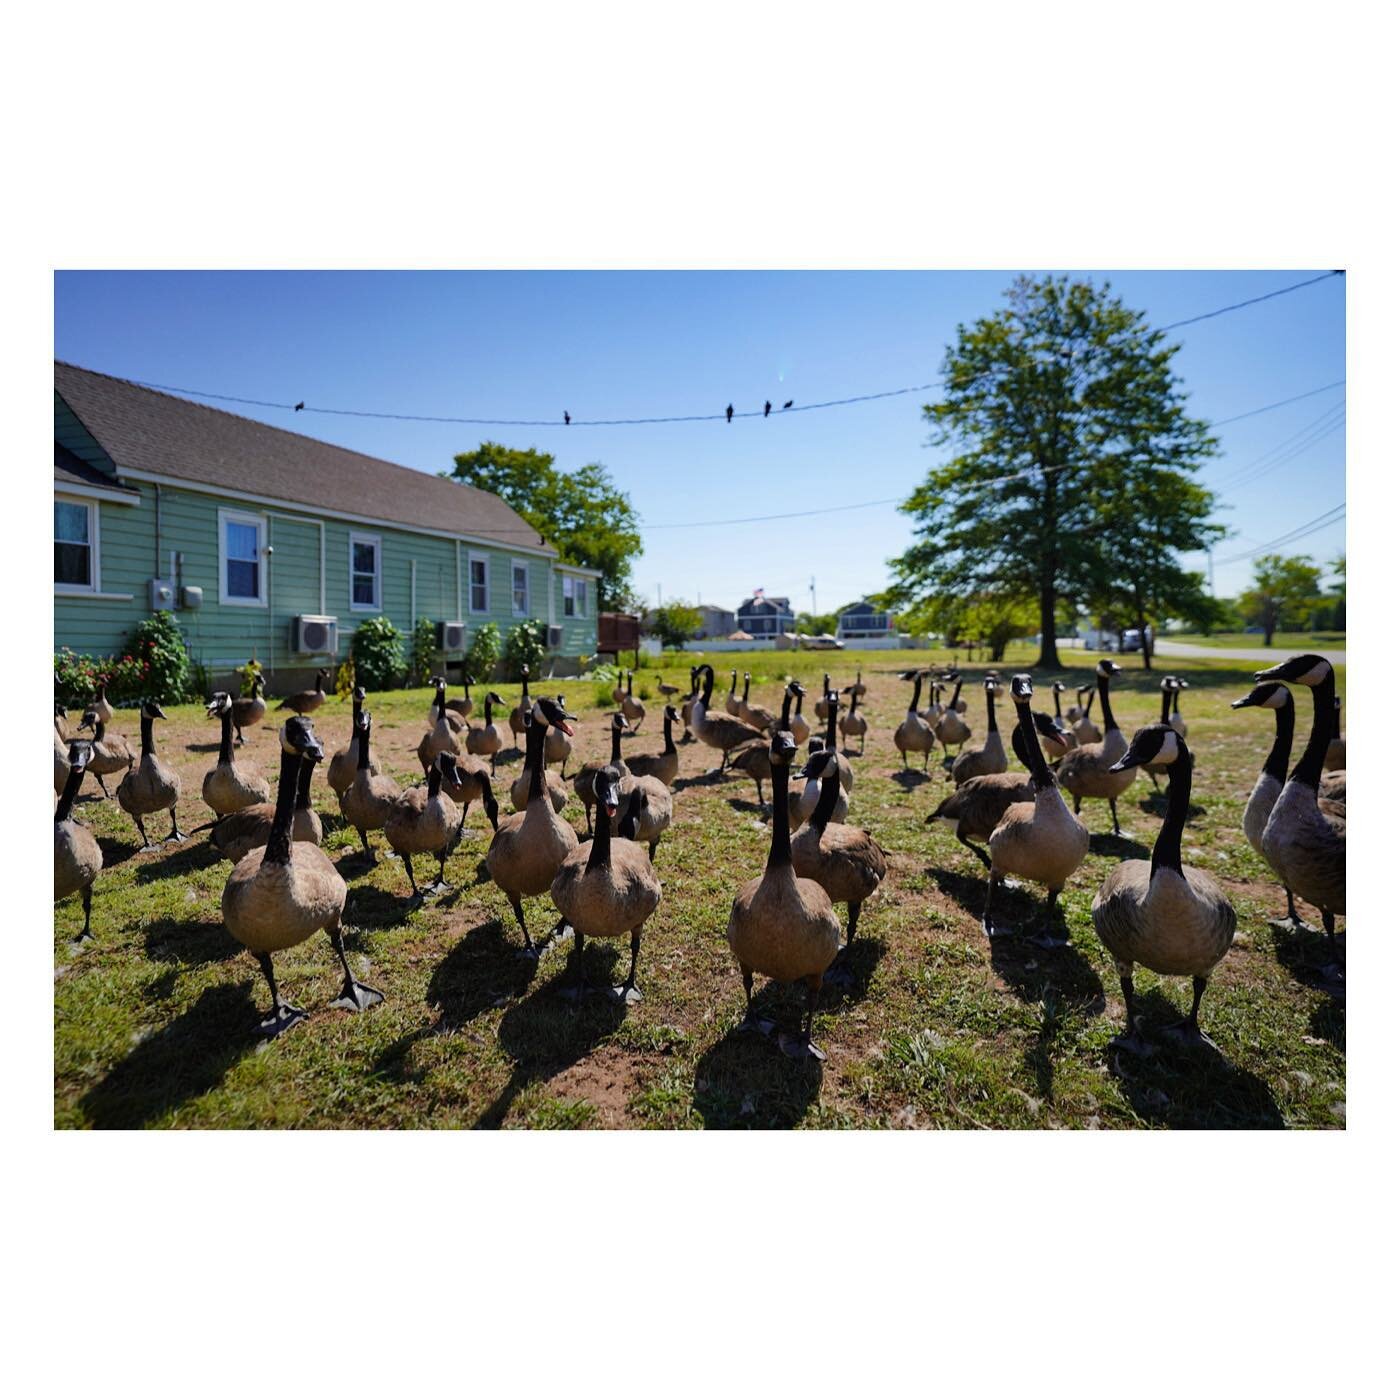 The perils of location scouting #statenisland #geese #geeseofinstagram #locationscouting🎥